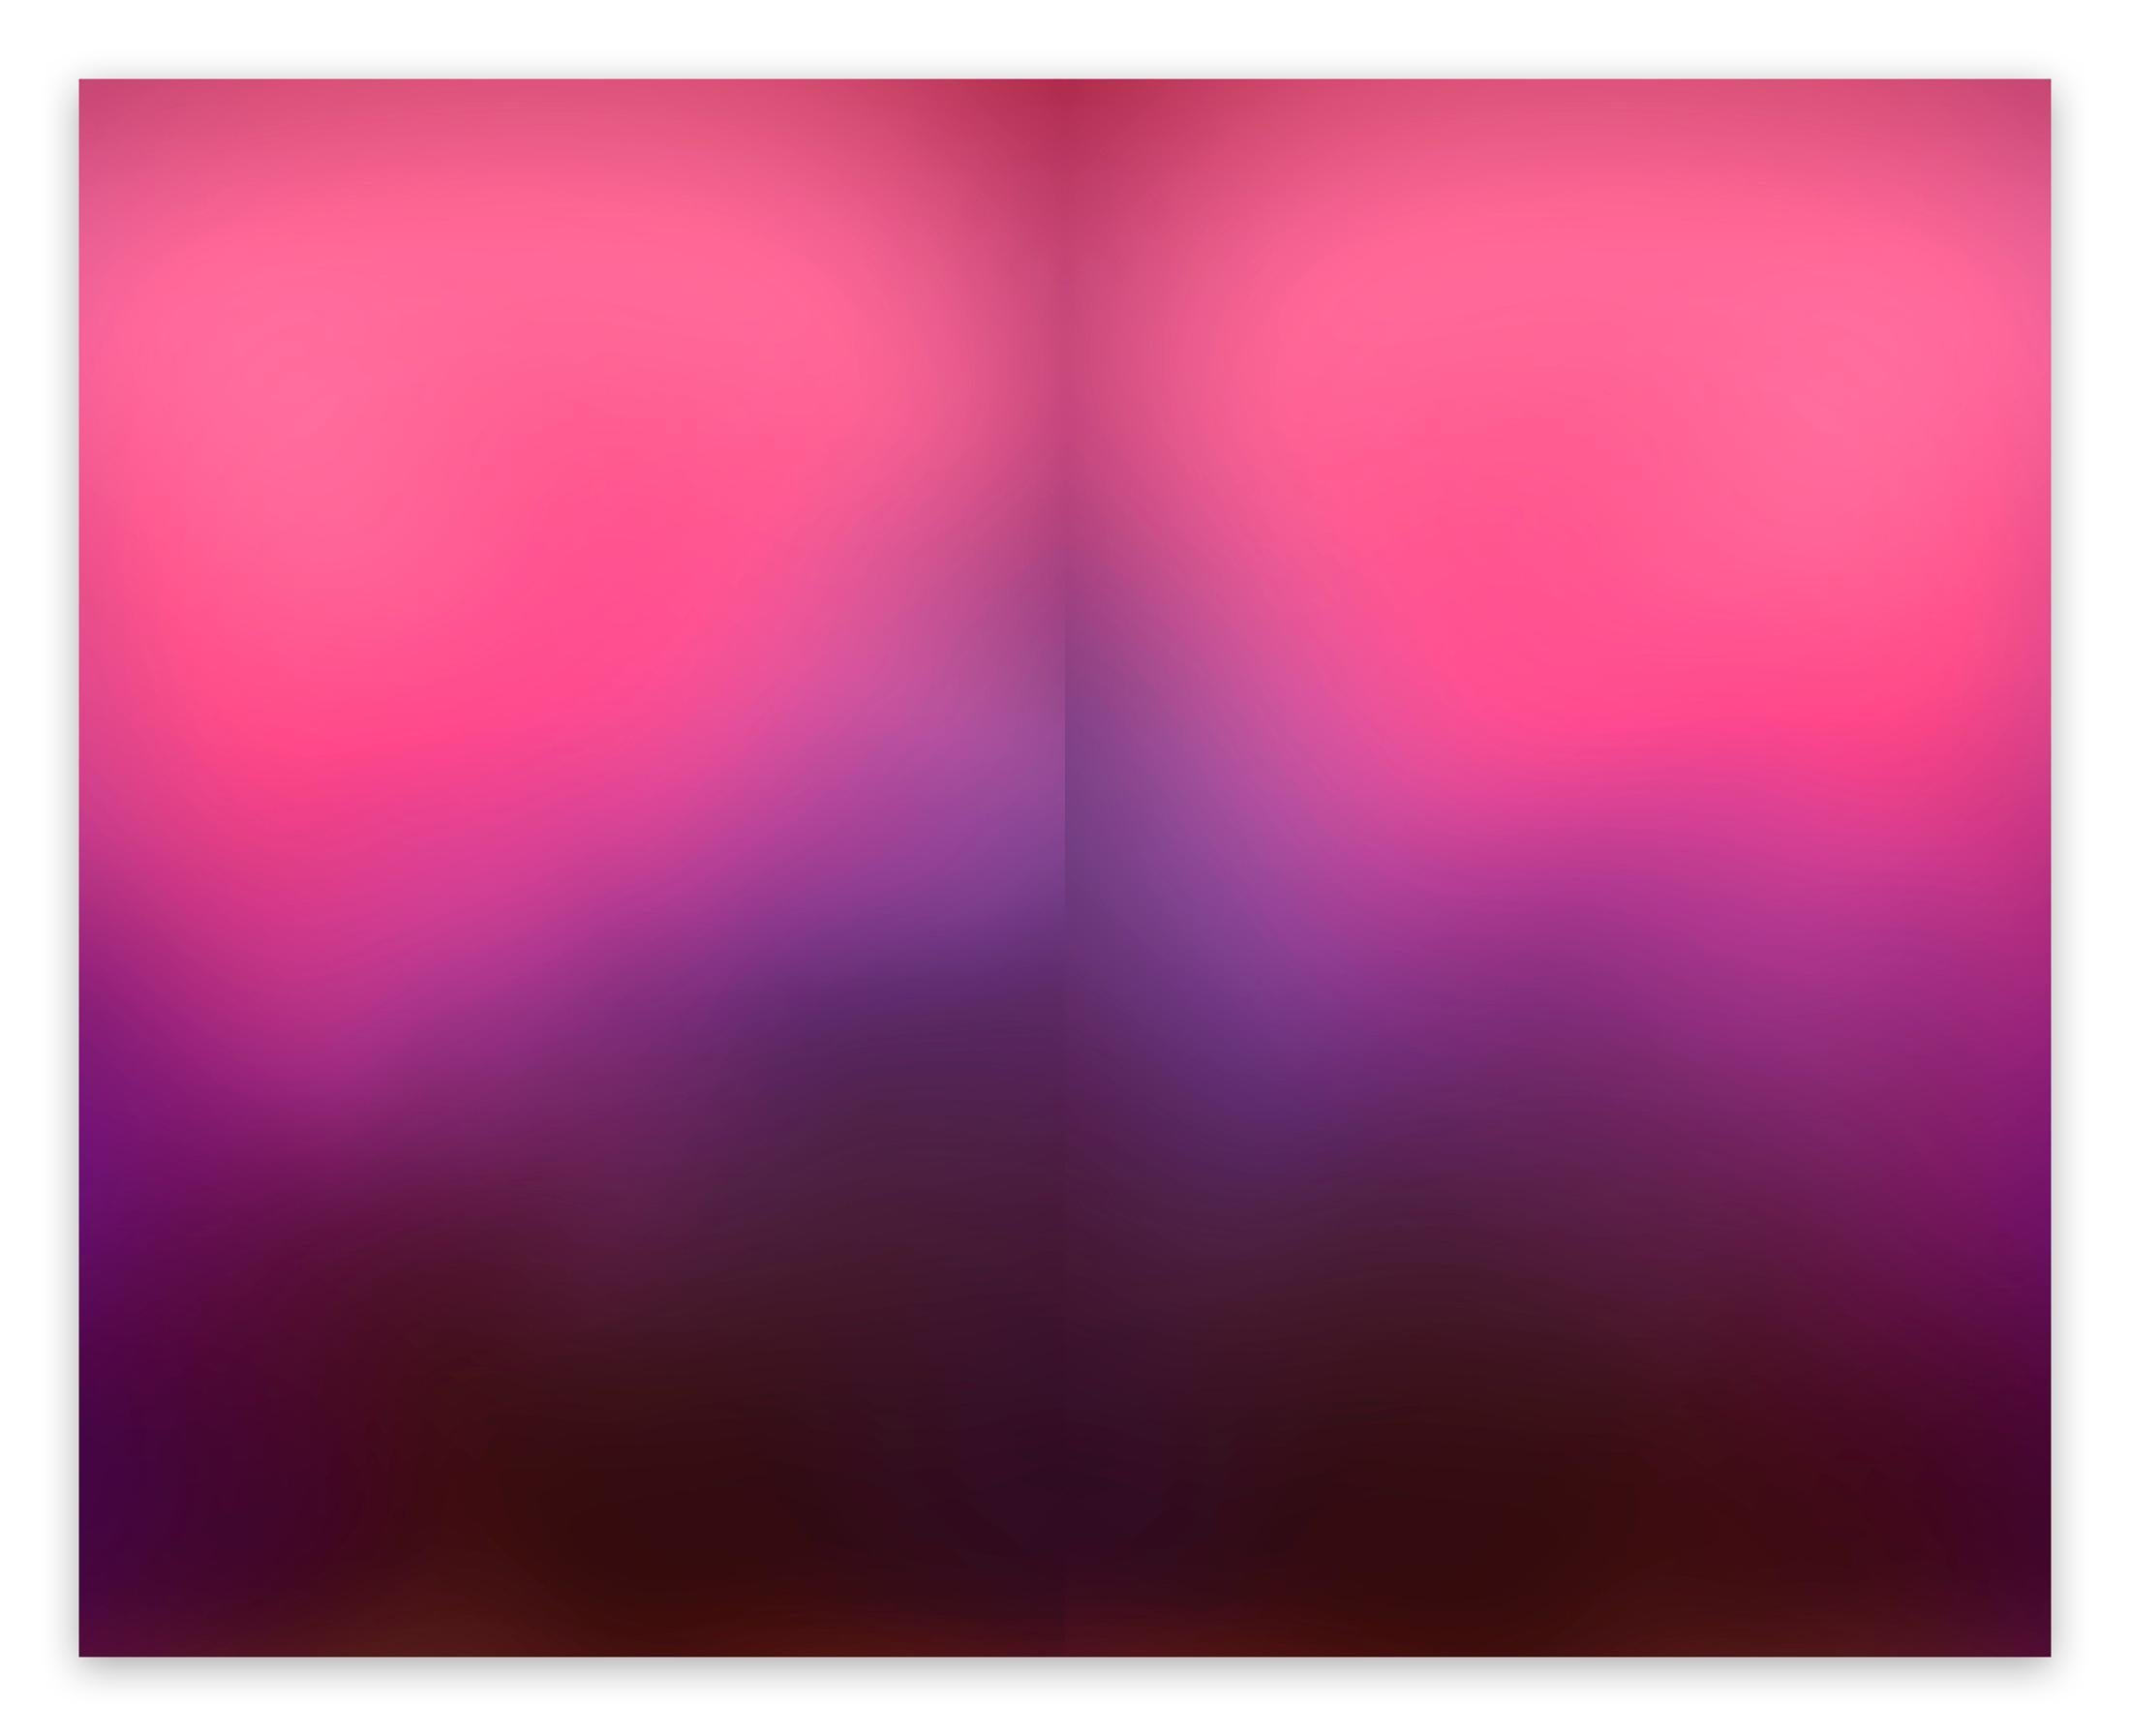 Breathe # 202202 (Abstract Photography)

Chromogenic Print Face-mounted 3mm Matte Plexiglas - Unframed.

Backed with Dibond and C-channel hanging system + keyhole option. 

Available on request 5-6 week turnaround.

Edition 1/3. 

Snell creates